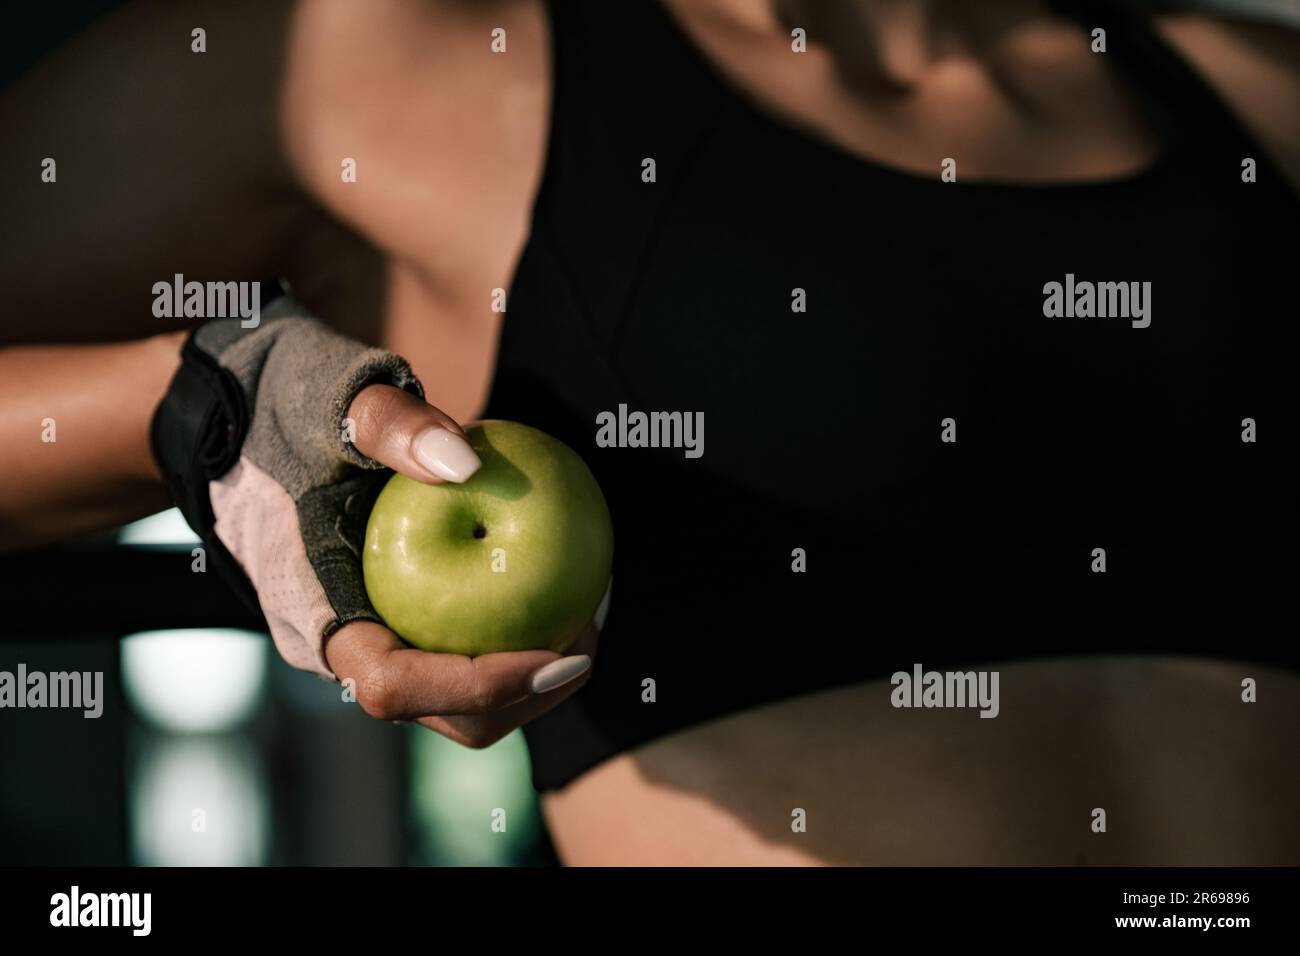 Close-up hands woman holding apple fruit after exercise workout in gym. Stock Photo